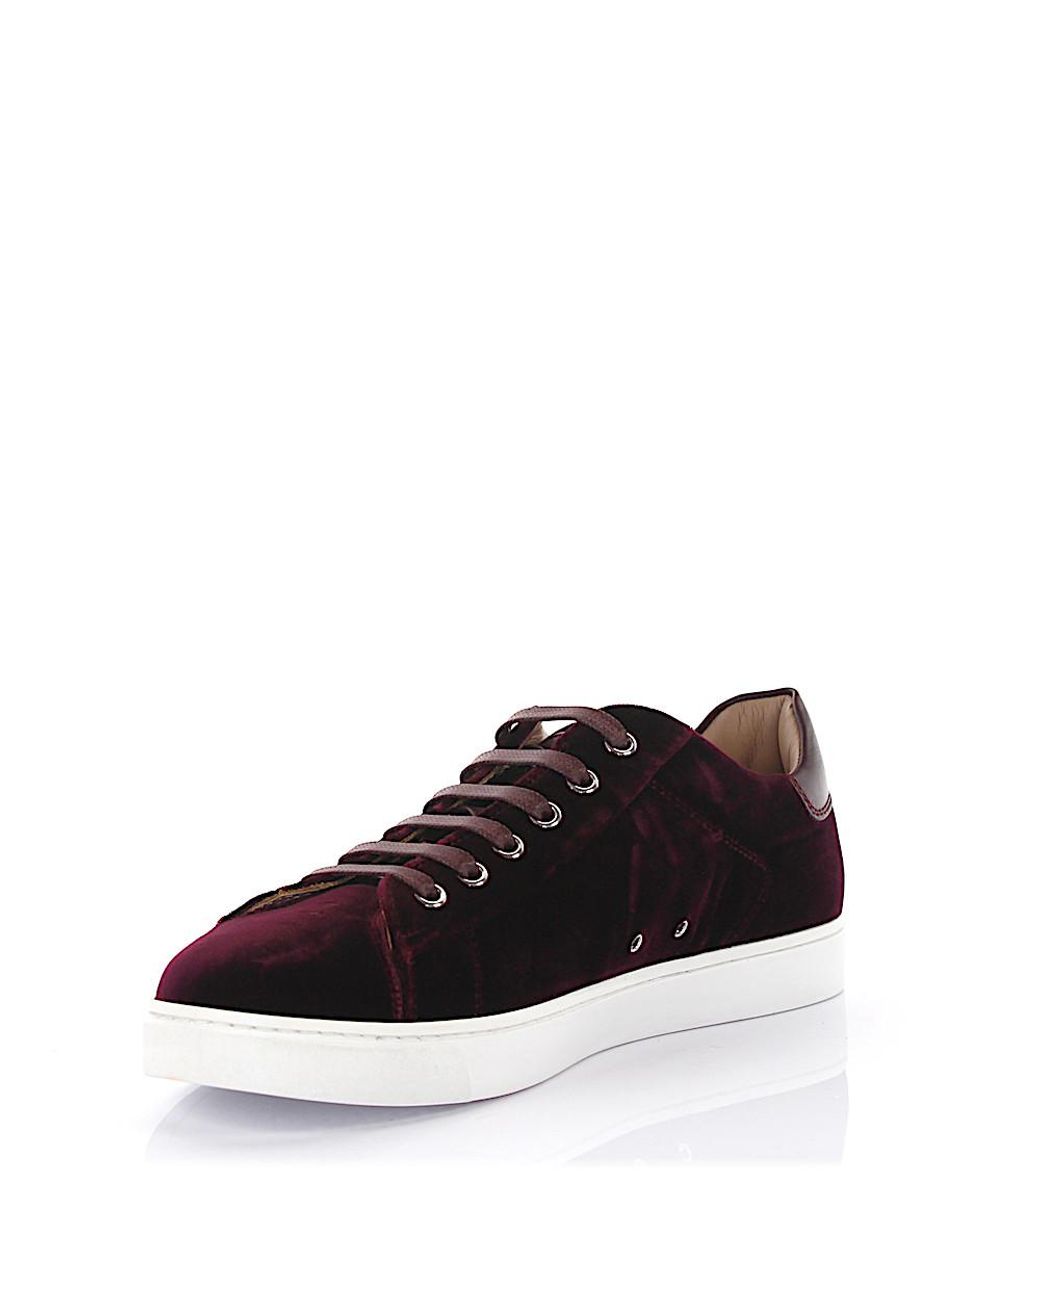 Gianvito Rossi Leather Low-top Sneakers S20460 Velvet in Red - Lyst